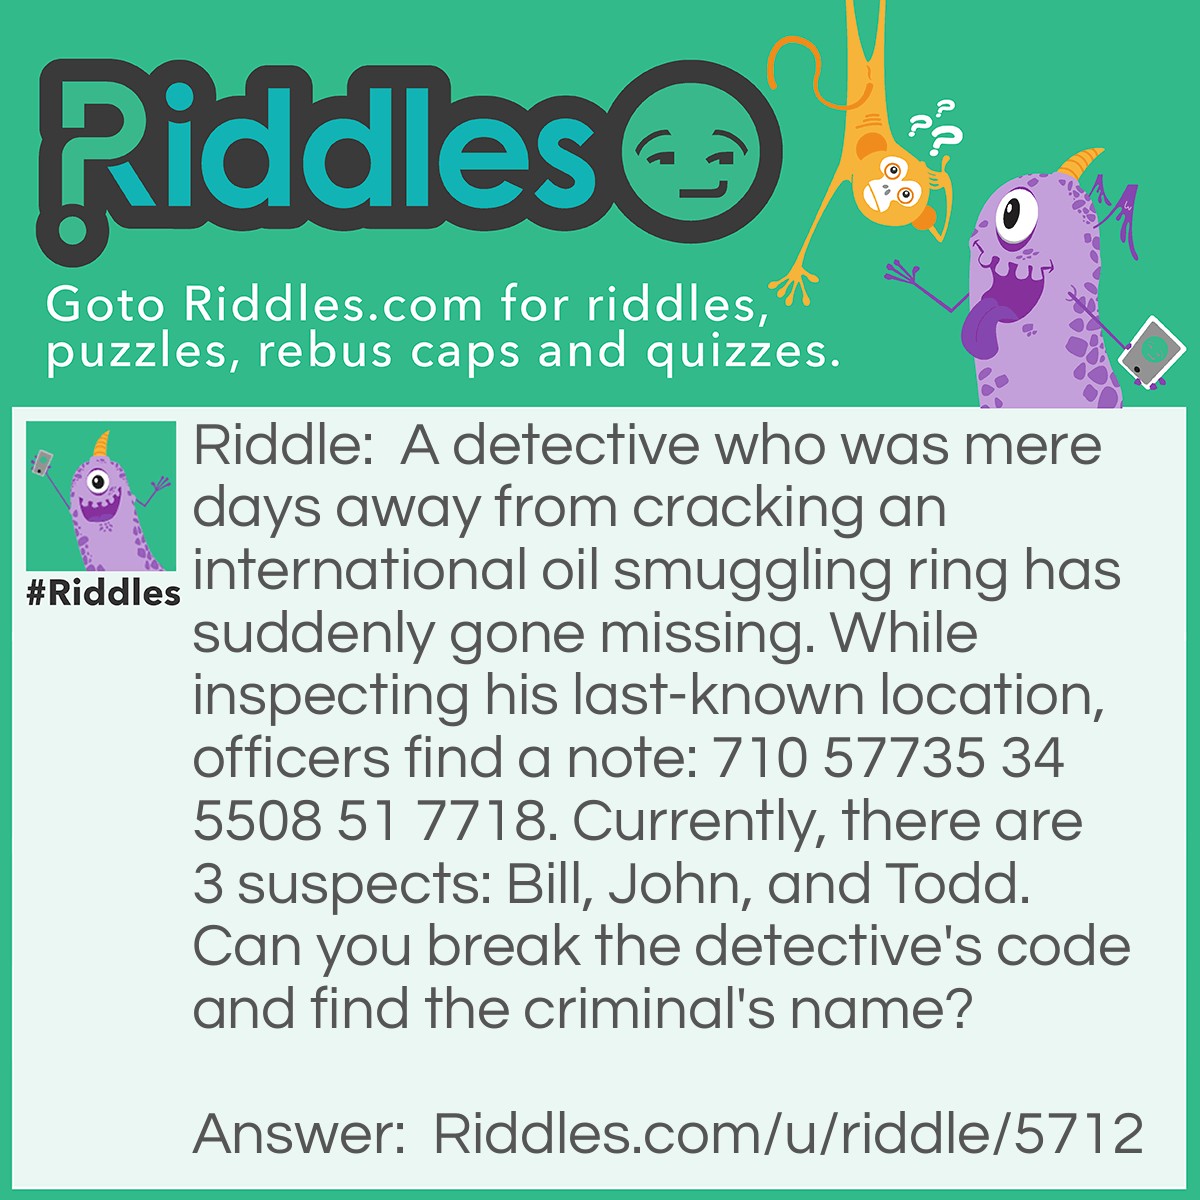 Riddle: A detective who was mere days away from cracking an international oil smuggling ring has suddenly gone missing. While inspecting his last-known location, officers find a note: 710 57735 34 5508 51 7718. Currently, there are 3 suspects: Bill, John, and Todd. Can you break the detective's code and find the criminal's name? Answer: Bill is the suspect if you read upside down the numbers it says: "Bill is boss. He sells oil."